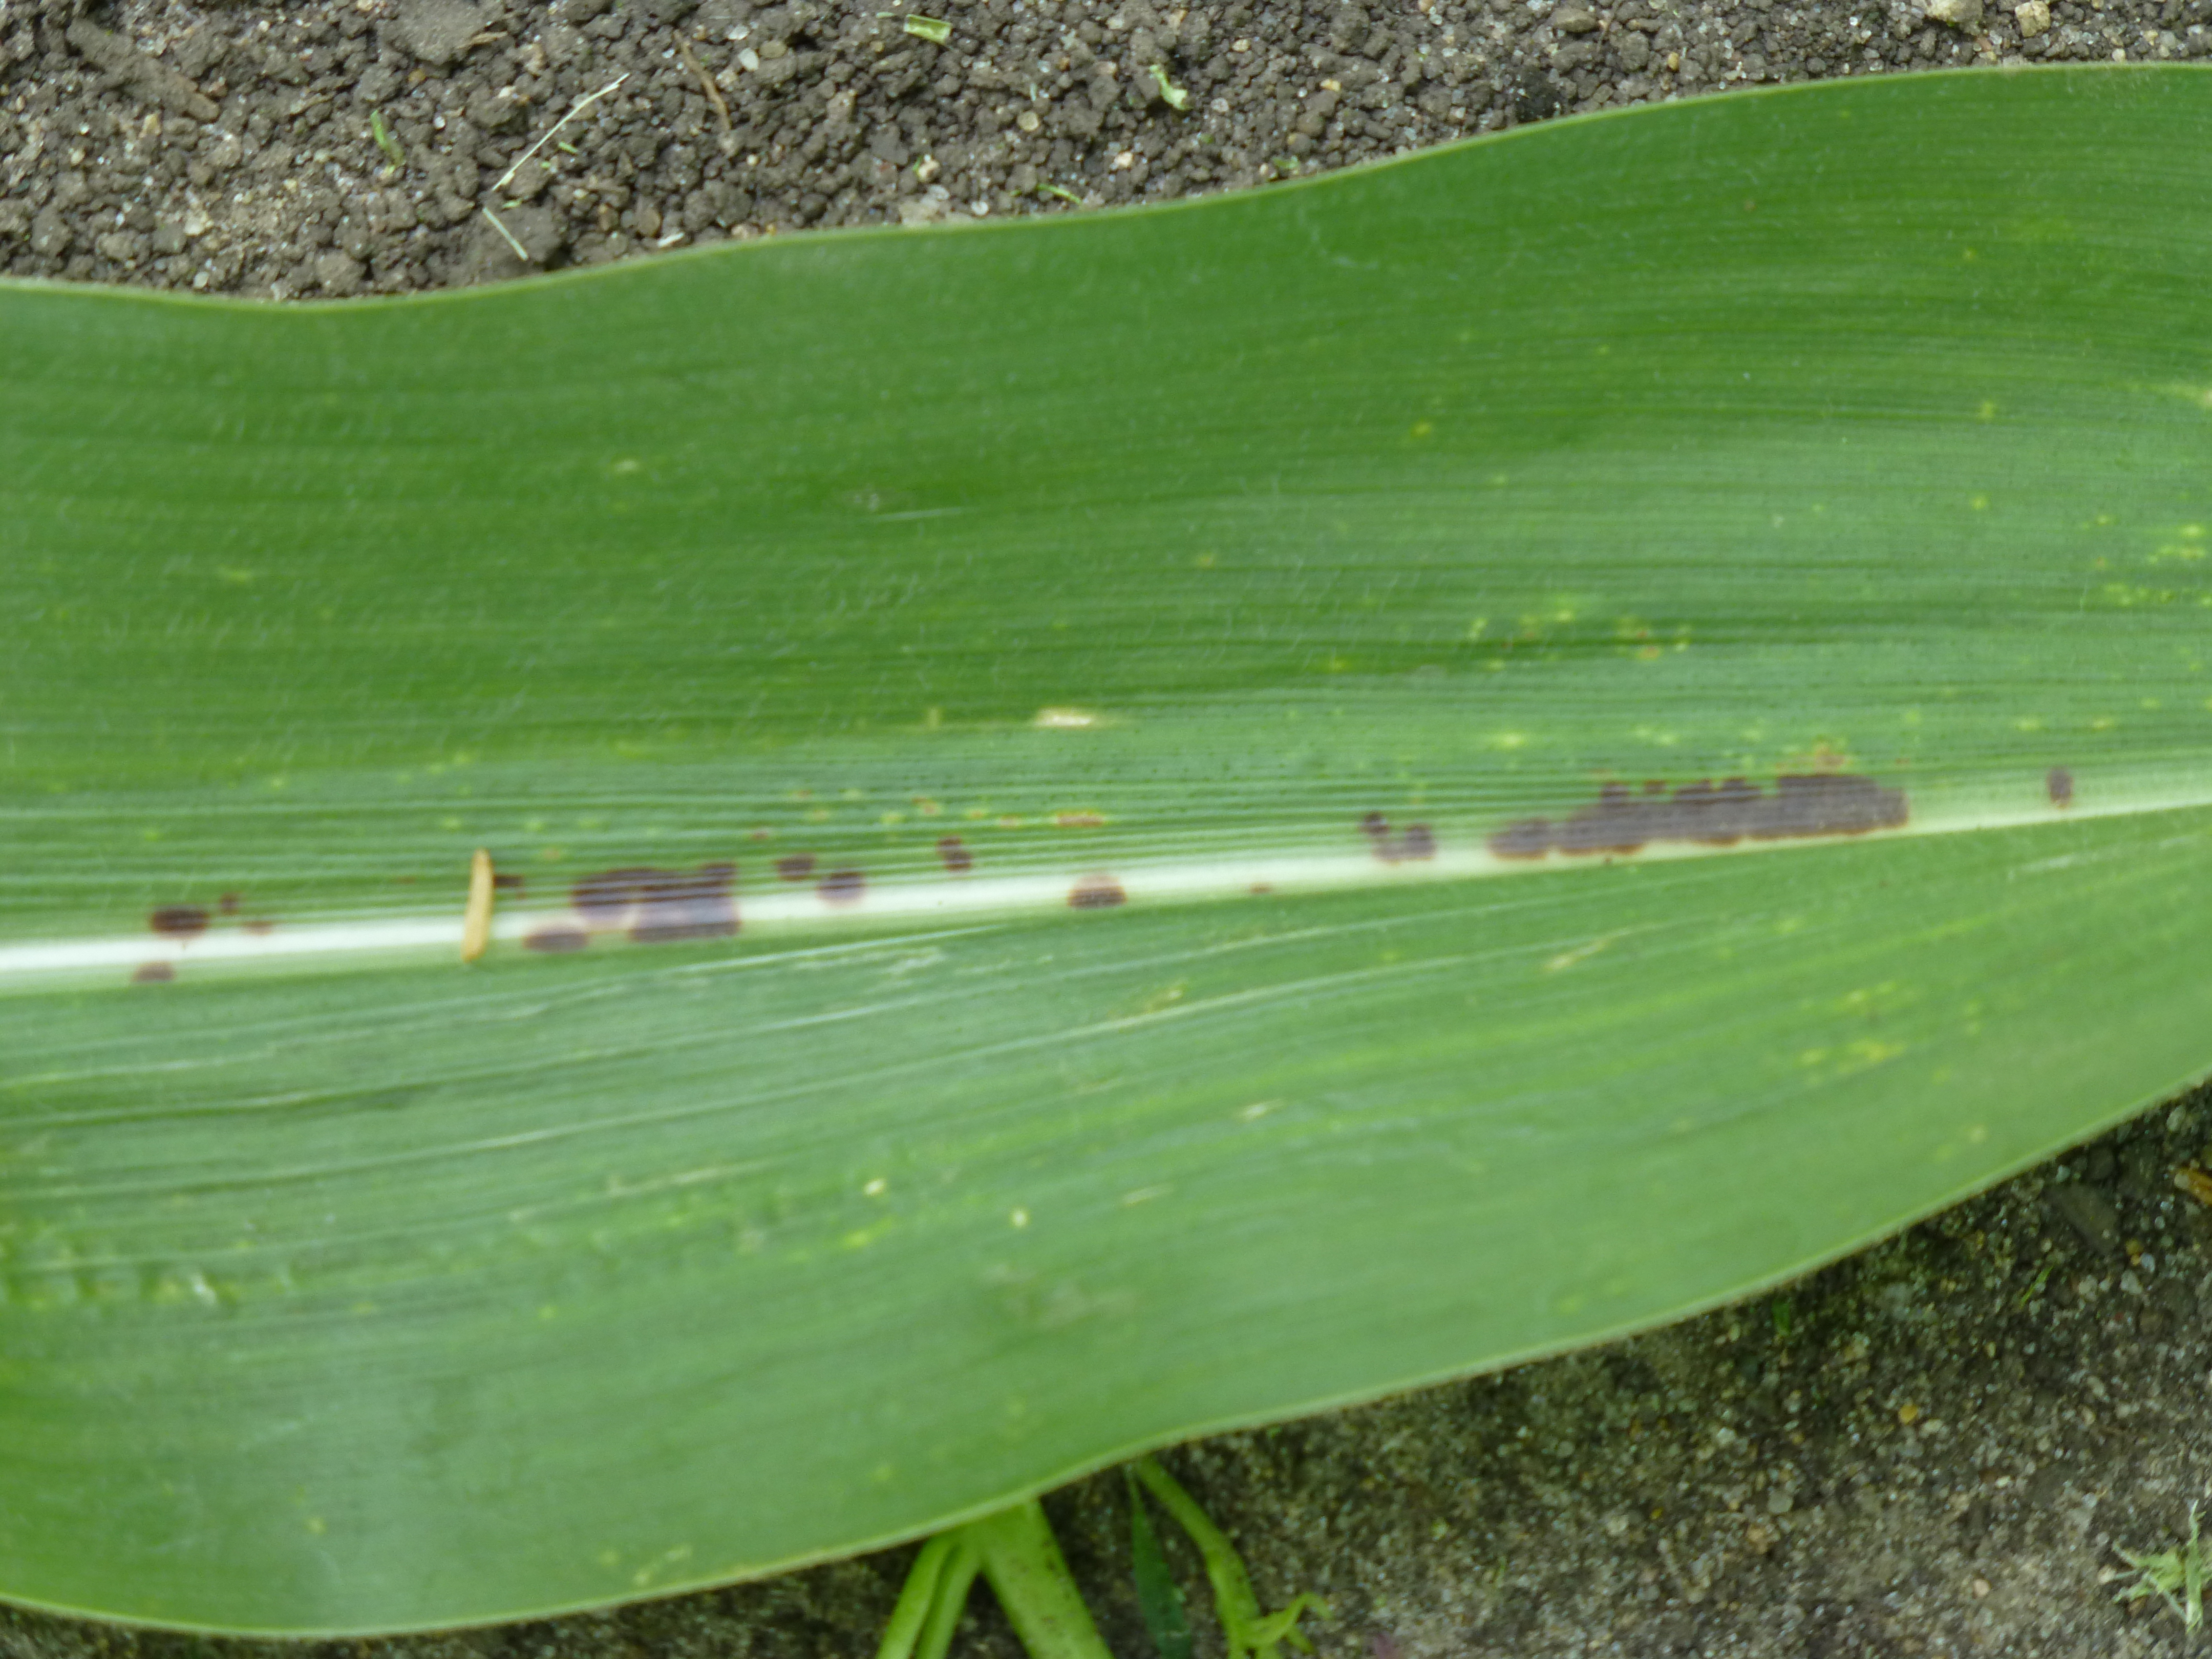 Dark spots occur on the midrib of leaves showing symptoms of Physoderma brown spot.